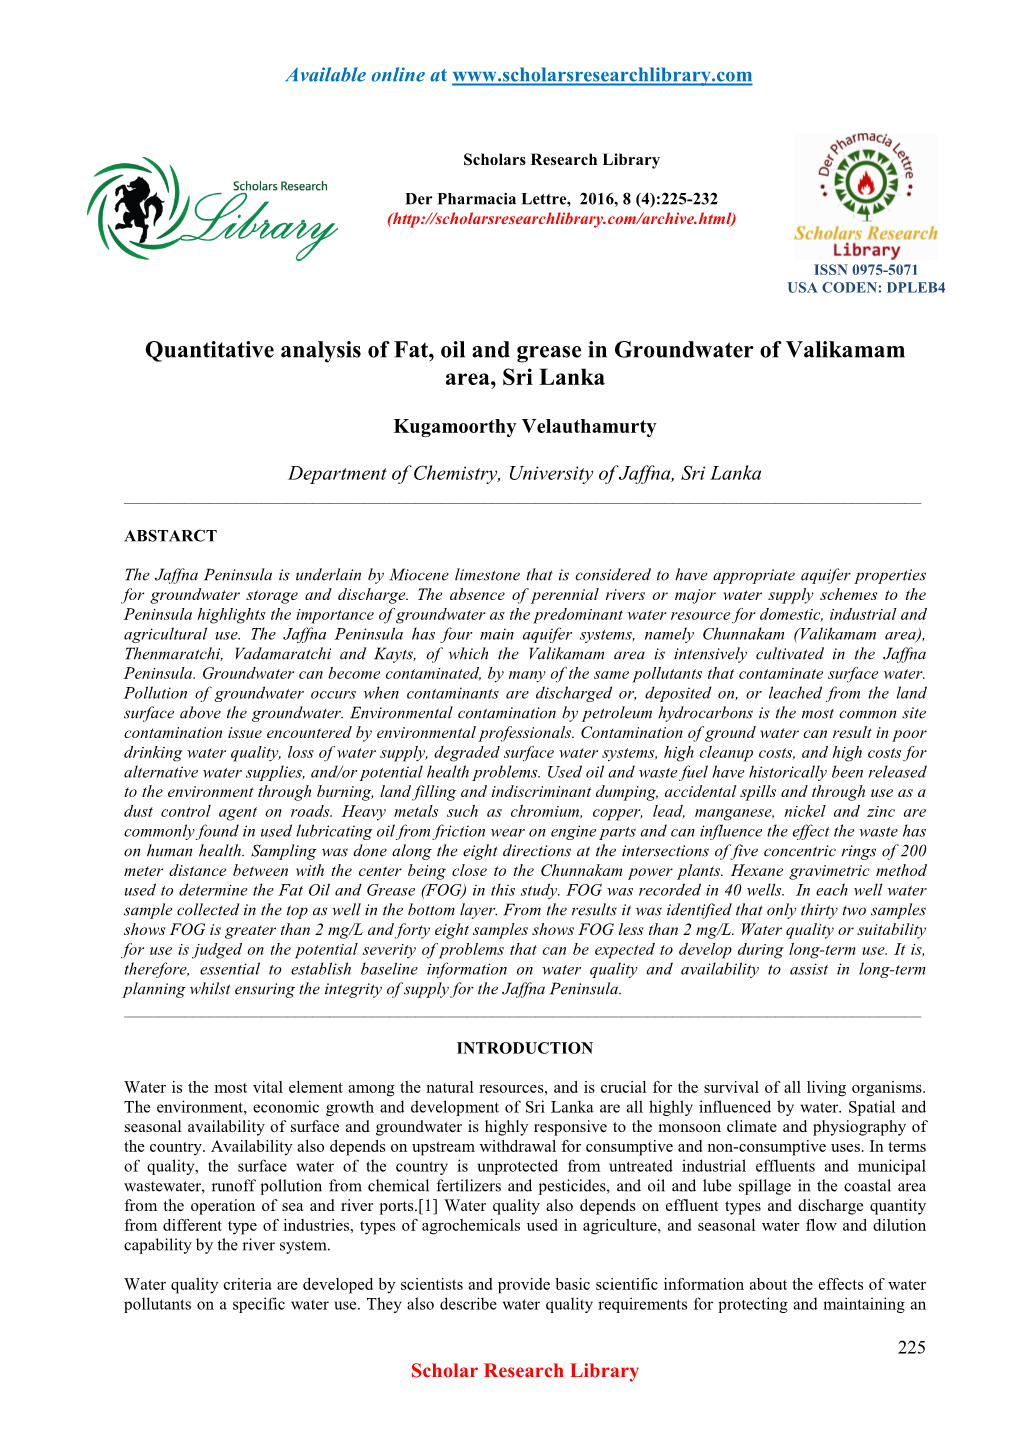 Quantitative Analysis of Fat, Oil and Grease in Groundwater of Valikamam Area, Sri Lanka